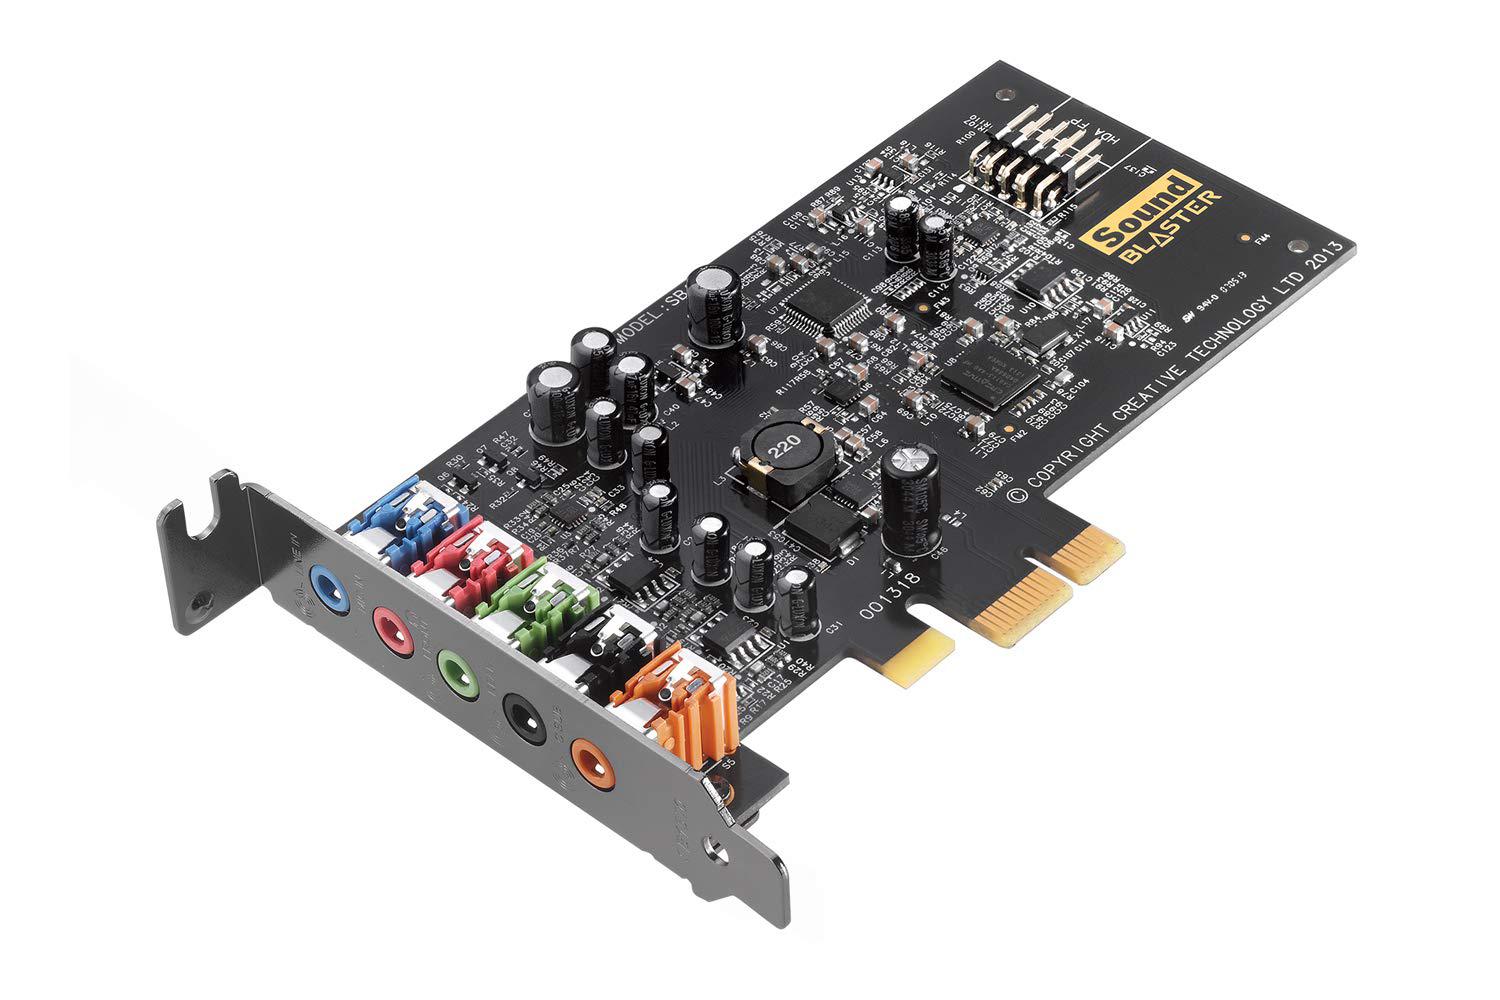 creative sound blaster audigy fx pcie 5.1 internal sound card with high performance headphone amp for pcs